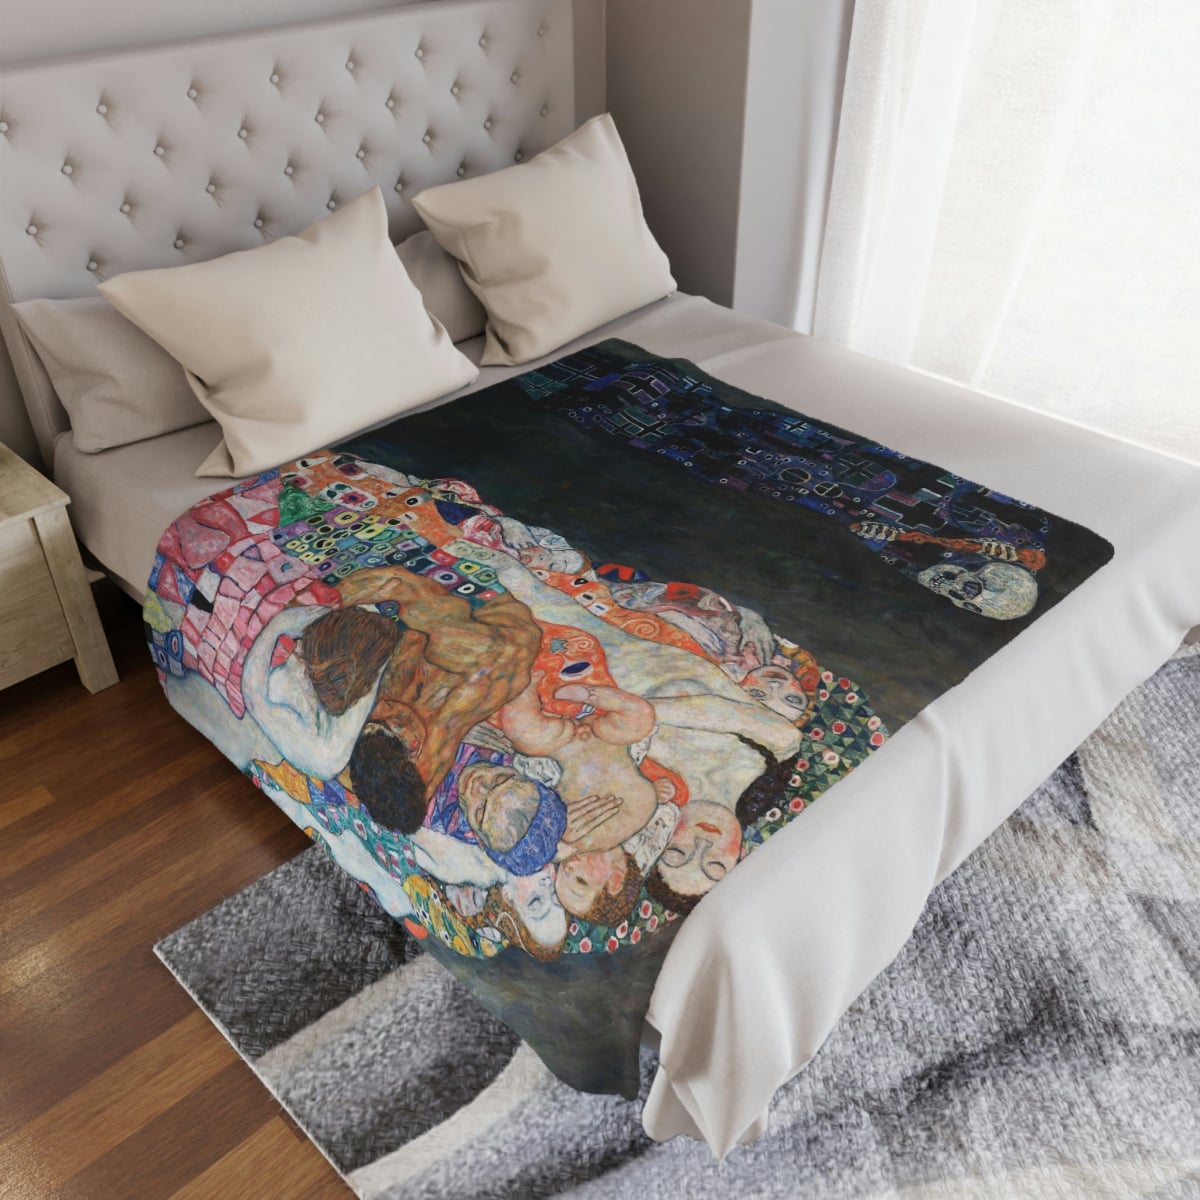 Artistic warmth and comfort in Klimt's 'Death and Life' blanket